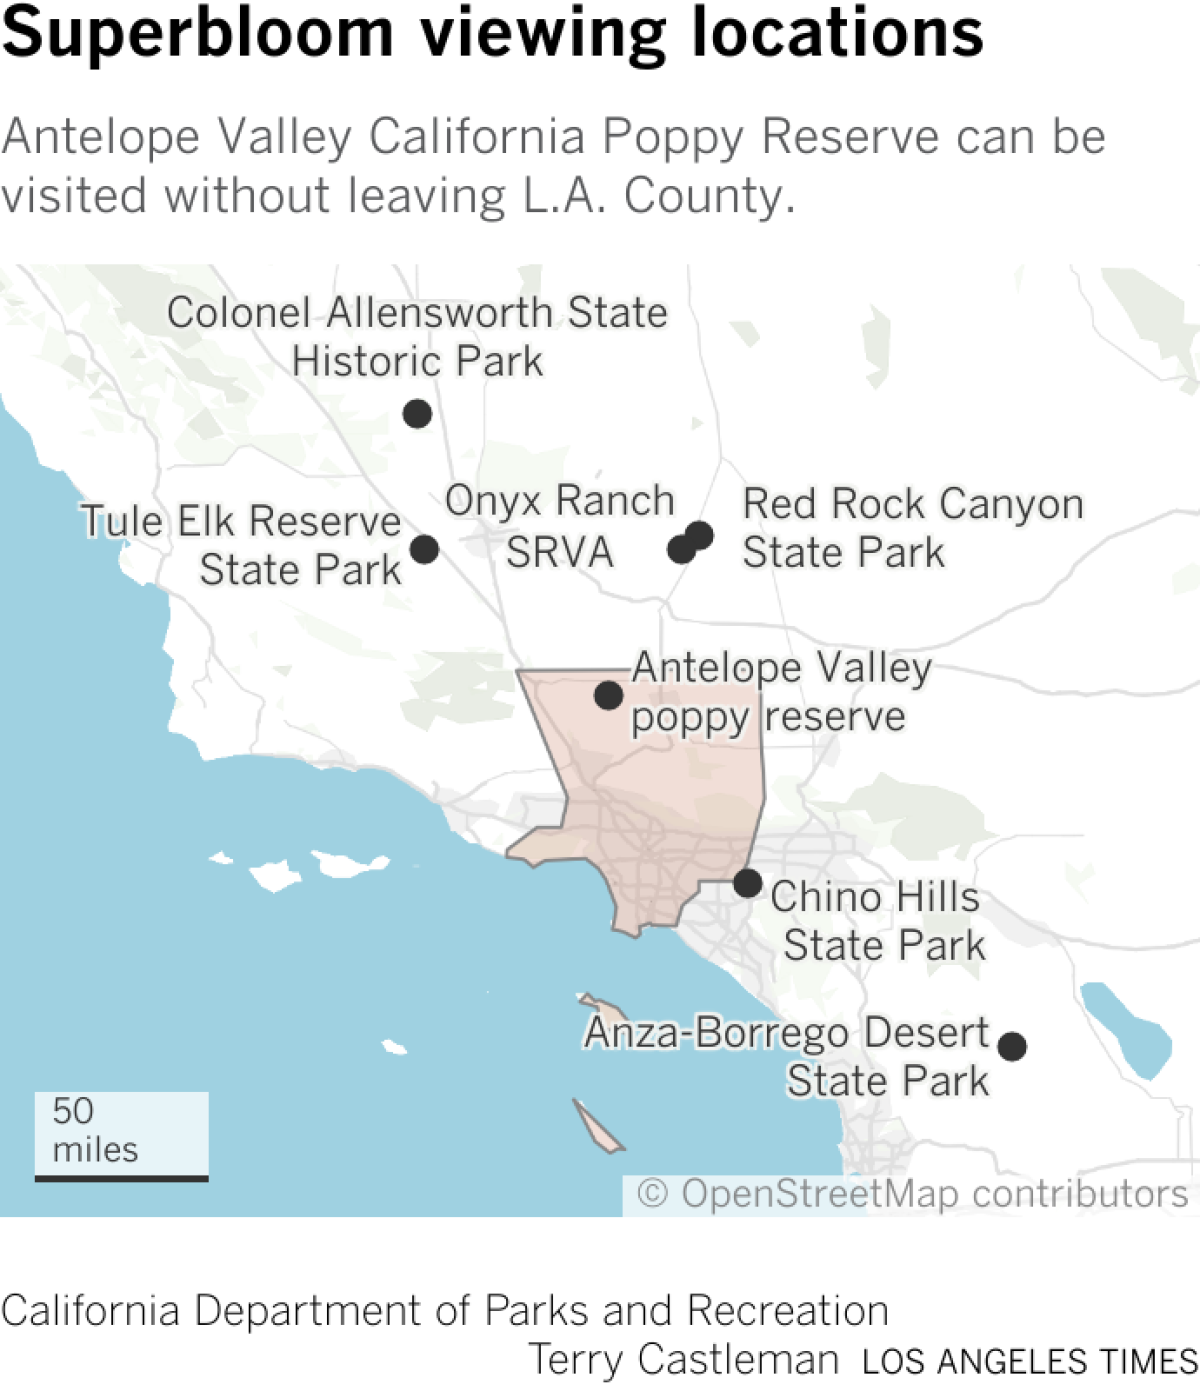 A map showing 7 superbloom viewing locations. They are Colonel Allensworth State Historic Park, Tule Elk Reserve State Park, Onyx Ranch State Vehicular Recreation Area, Red Rock Canyon State Park, Antelope Valley Preserve, Chino Hills State Park, and Anza-Borrego Desert State Park. 